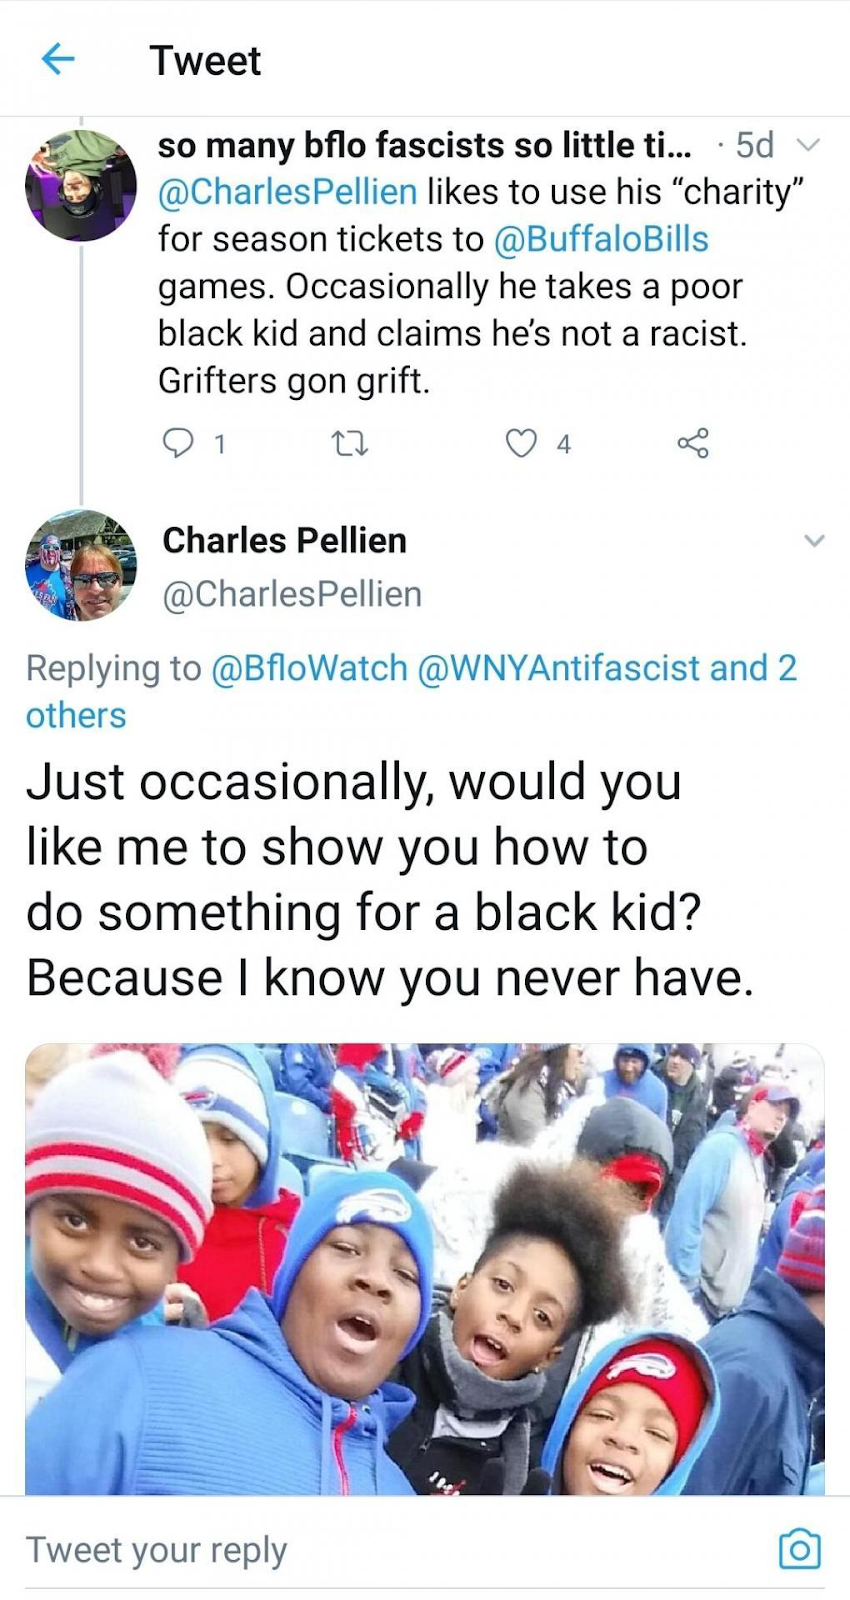 A tweet from Charles Pellien that reads, "Just occasionally, would you like me to show you how to do something for a black kid? Because I know you never have."